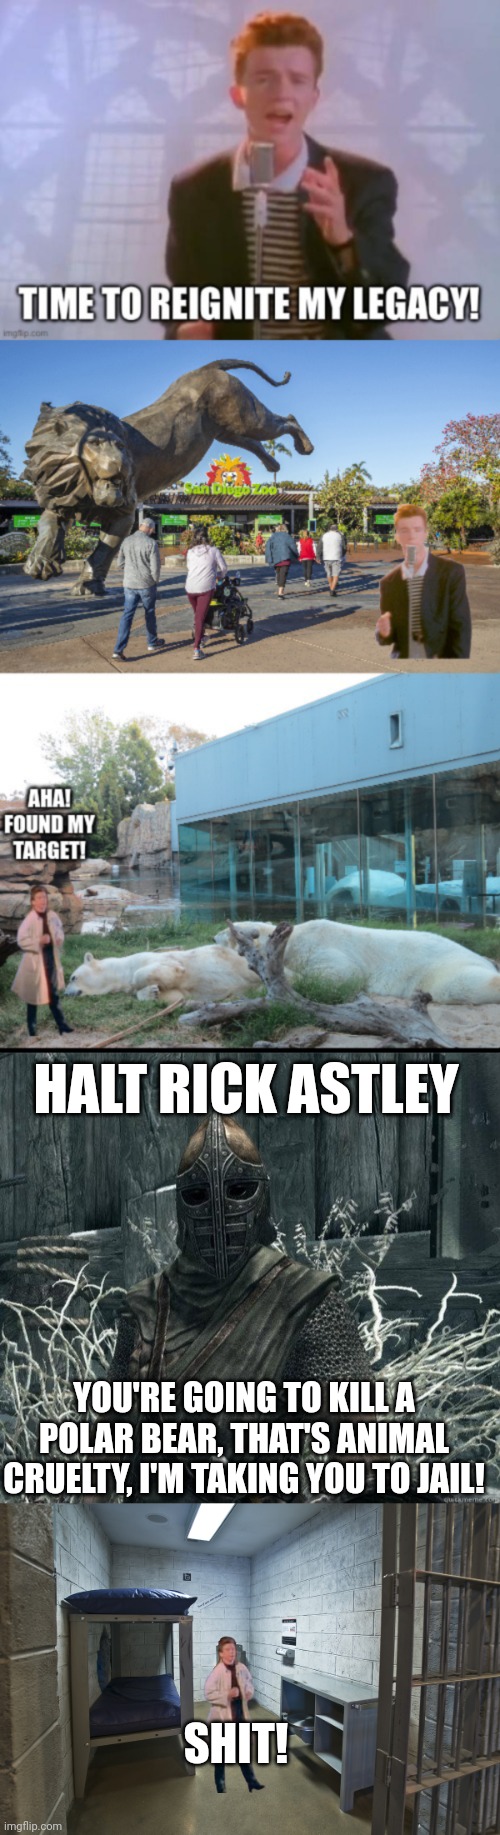 Rick goes to jail | HALT RICK ASTLEY; YOU'RE GOING TO KILL A POLAR BEAR, THAT'S ANIMAL CRUELTY, I'M TAKING YOU TO JAIL! SHIT! | image tagged in skyrimguard,jail cell | made w/ Imgflip meme maker